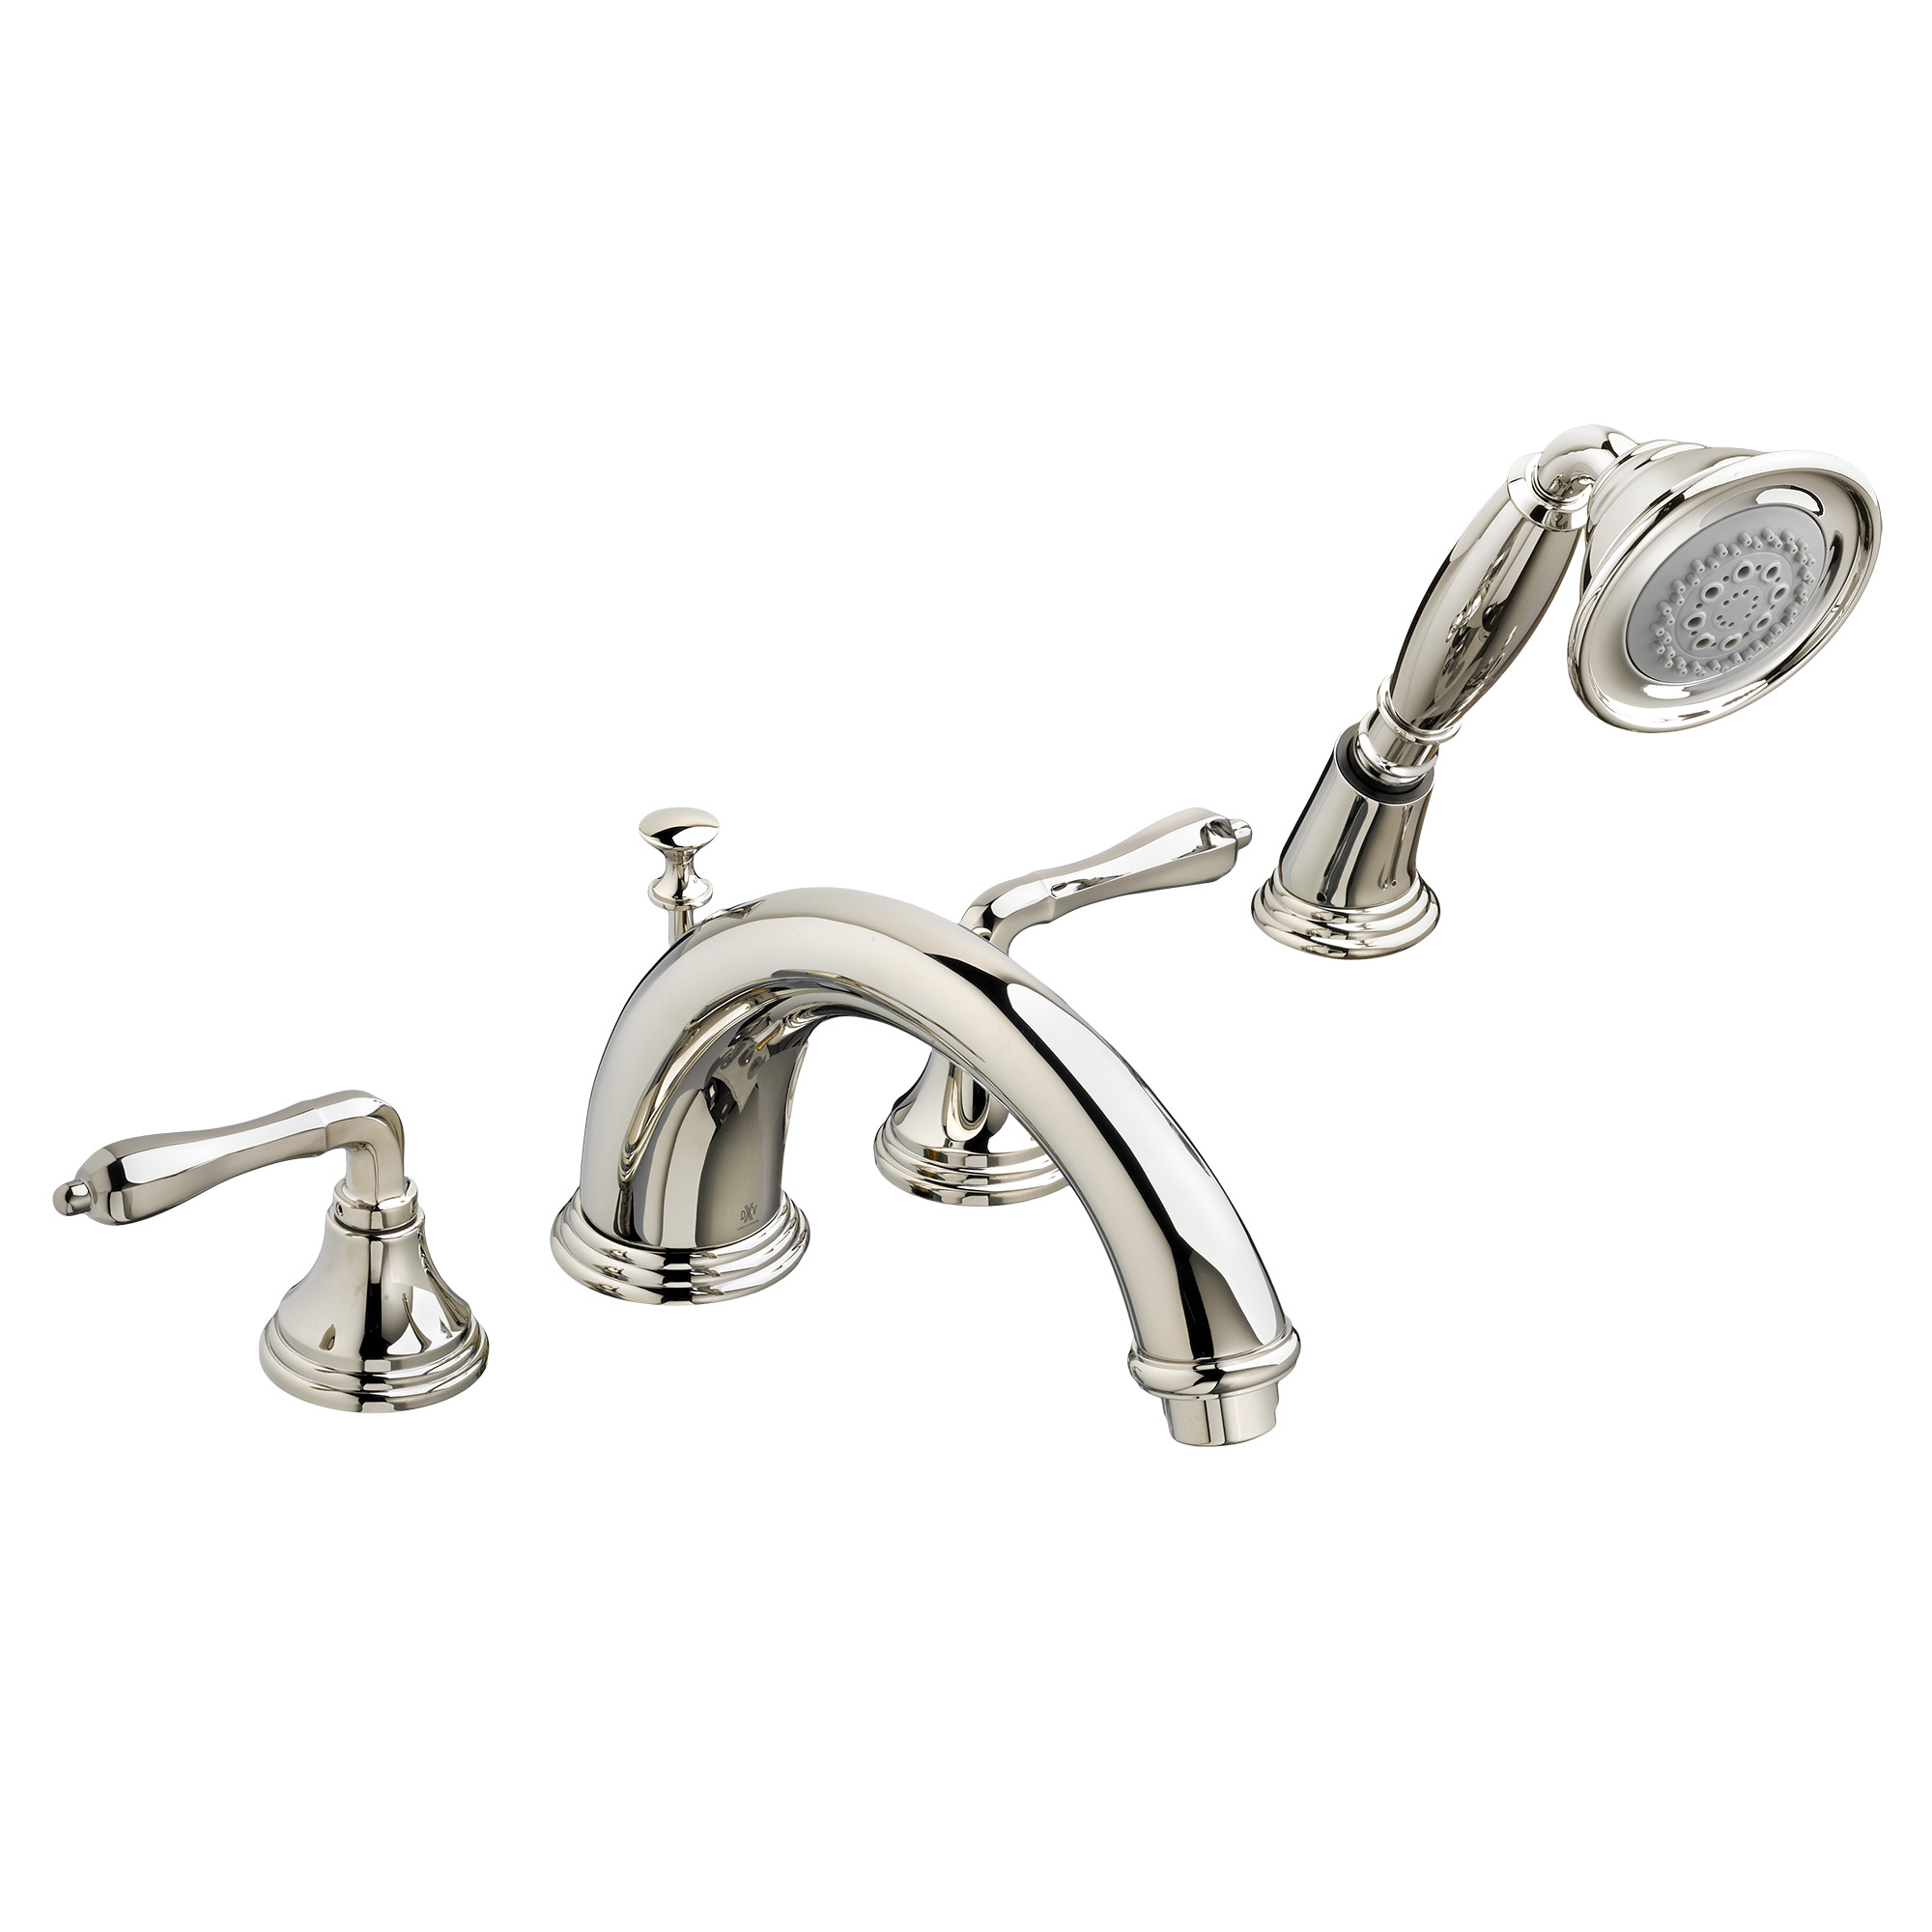 Deck Mount Tub Filler with Hand Shower and Lever Handles